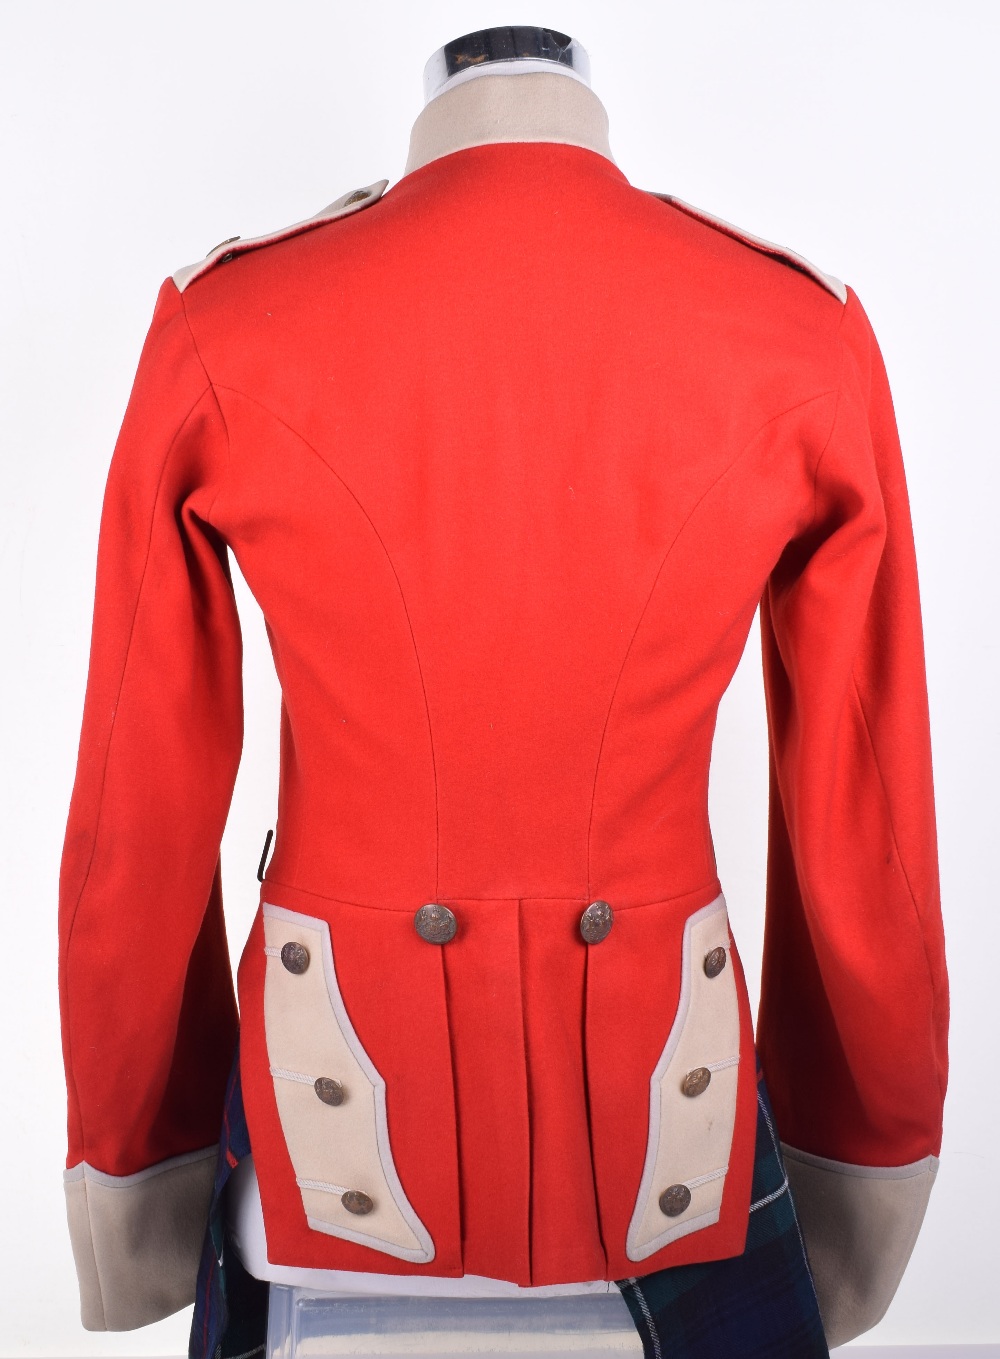 Seaforth Highlanders Experimental Tunic, of red scarlet cloth with white buff stand up collar, - Image 4 of 7